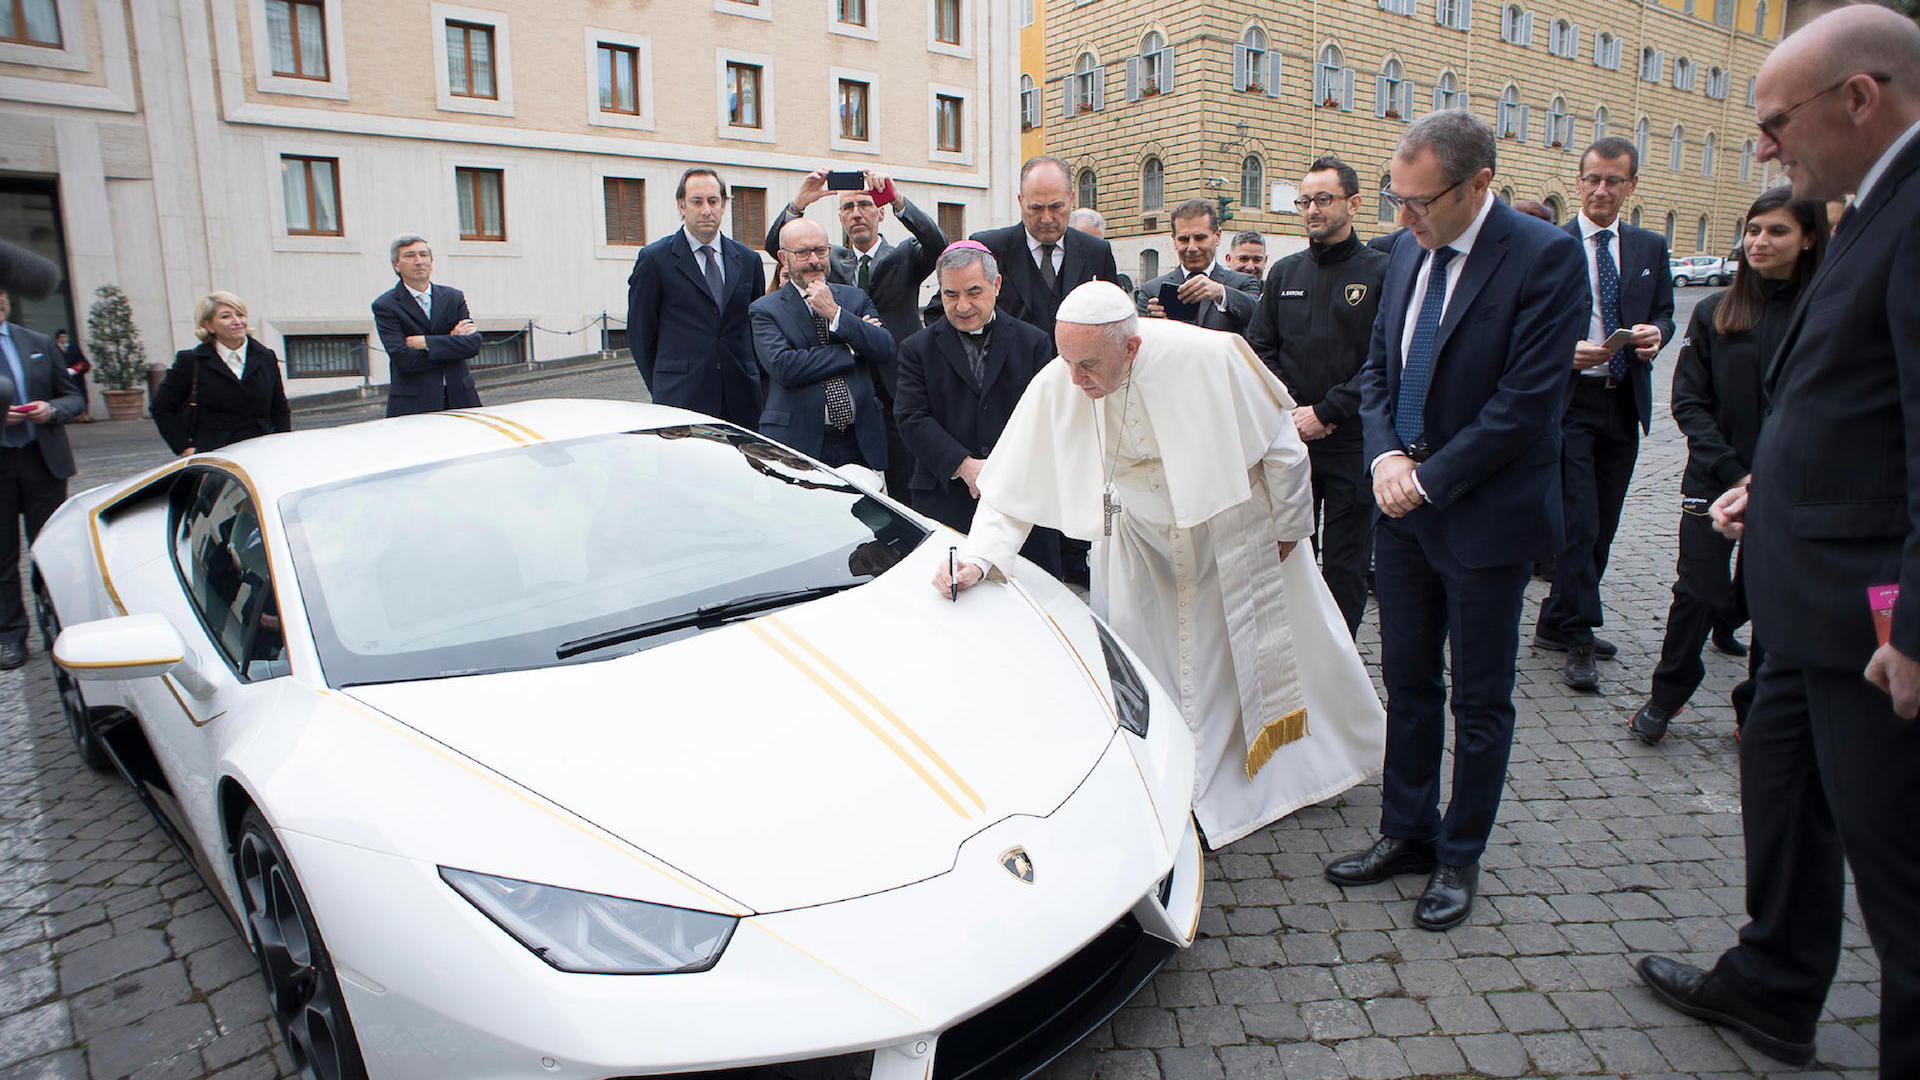 Special Lamborghini Huracán donated to Pope Francis for charity